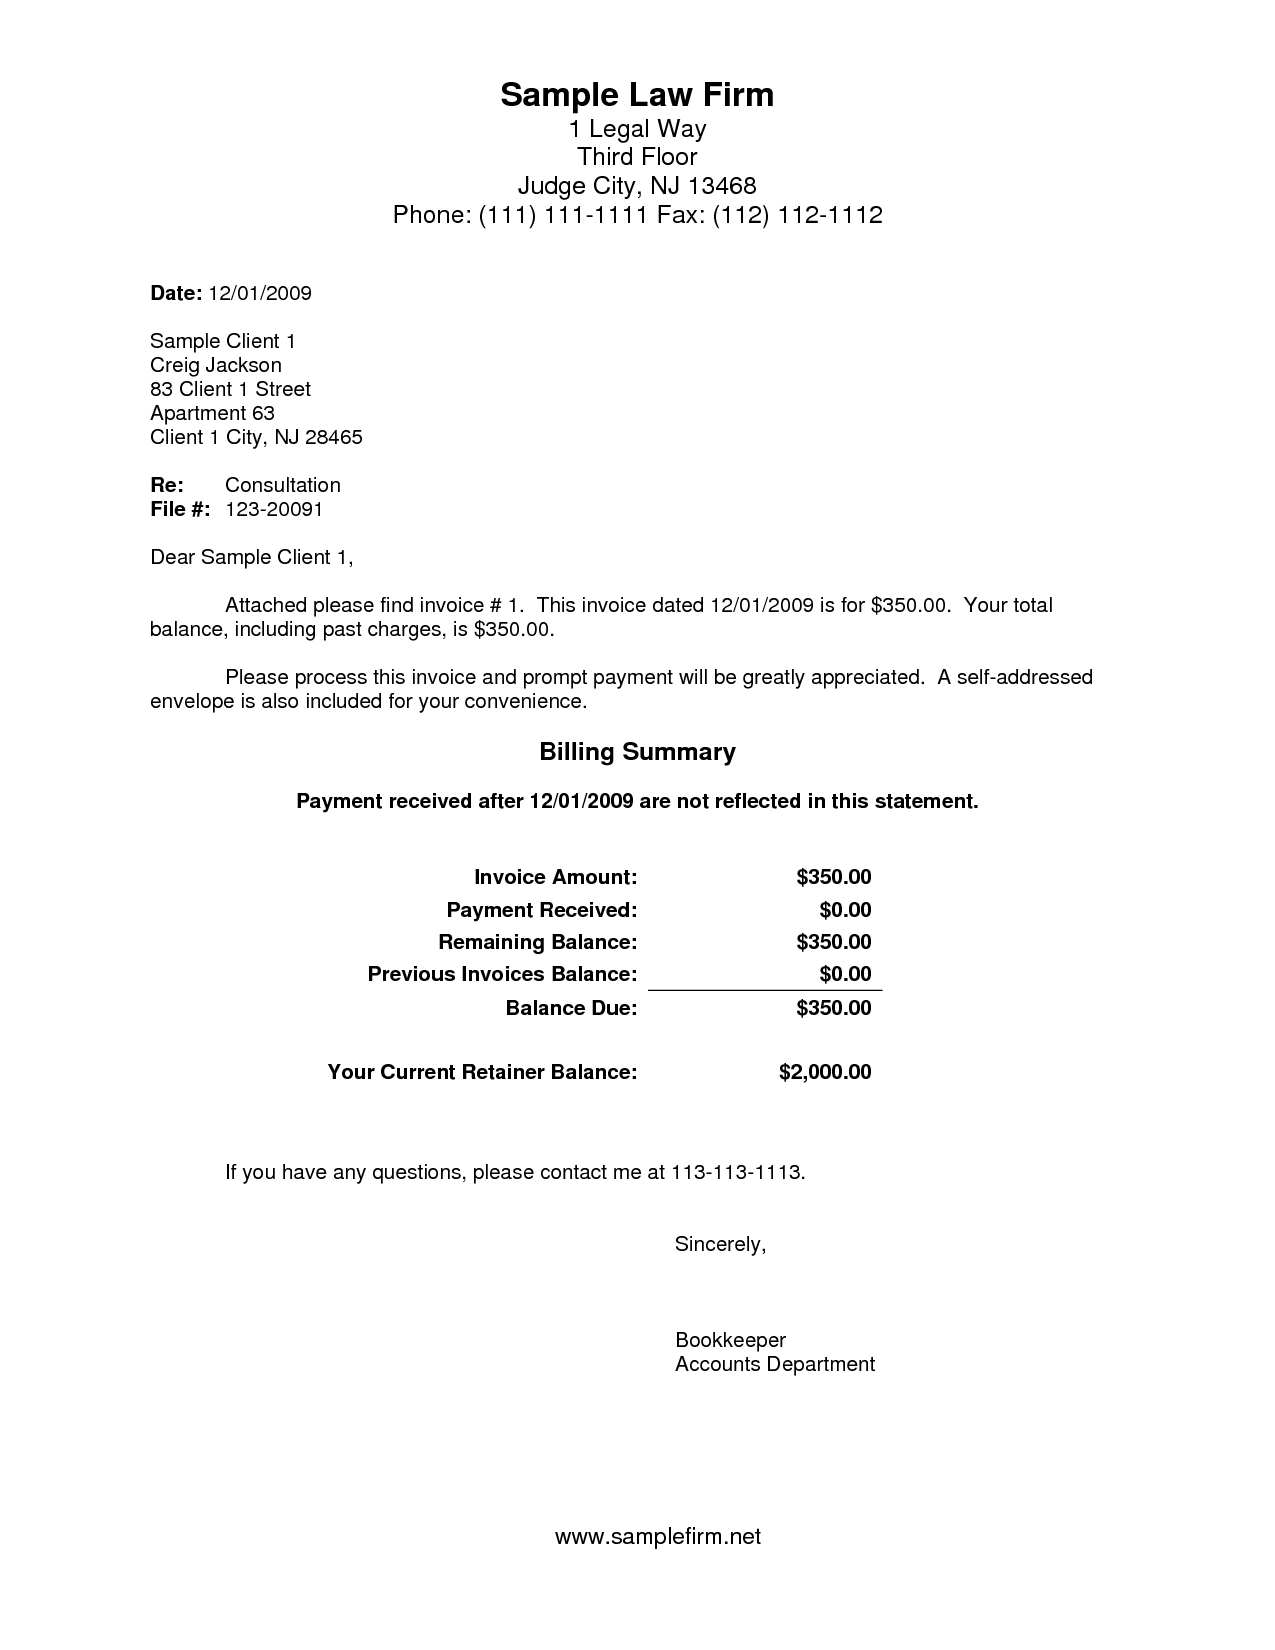 doc623840 legal invoice legal invoice template for attorneys legal requirements for invoices